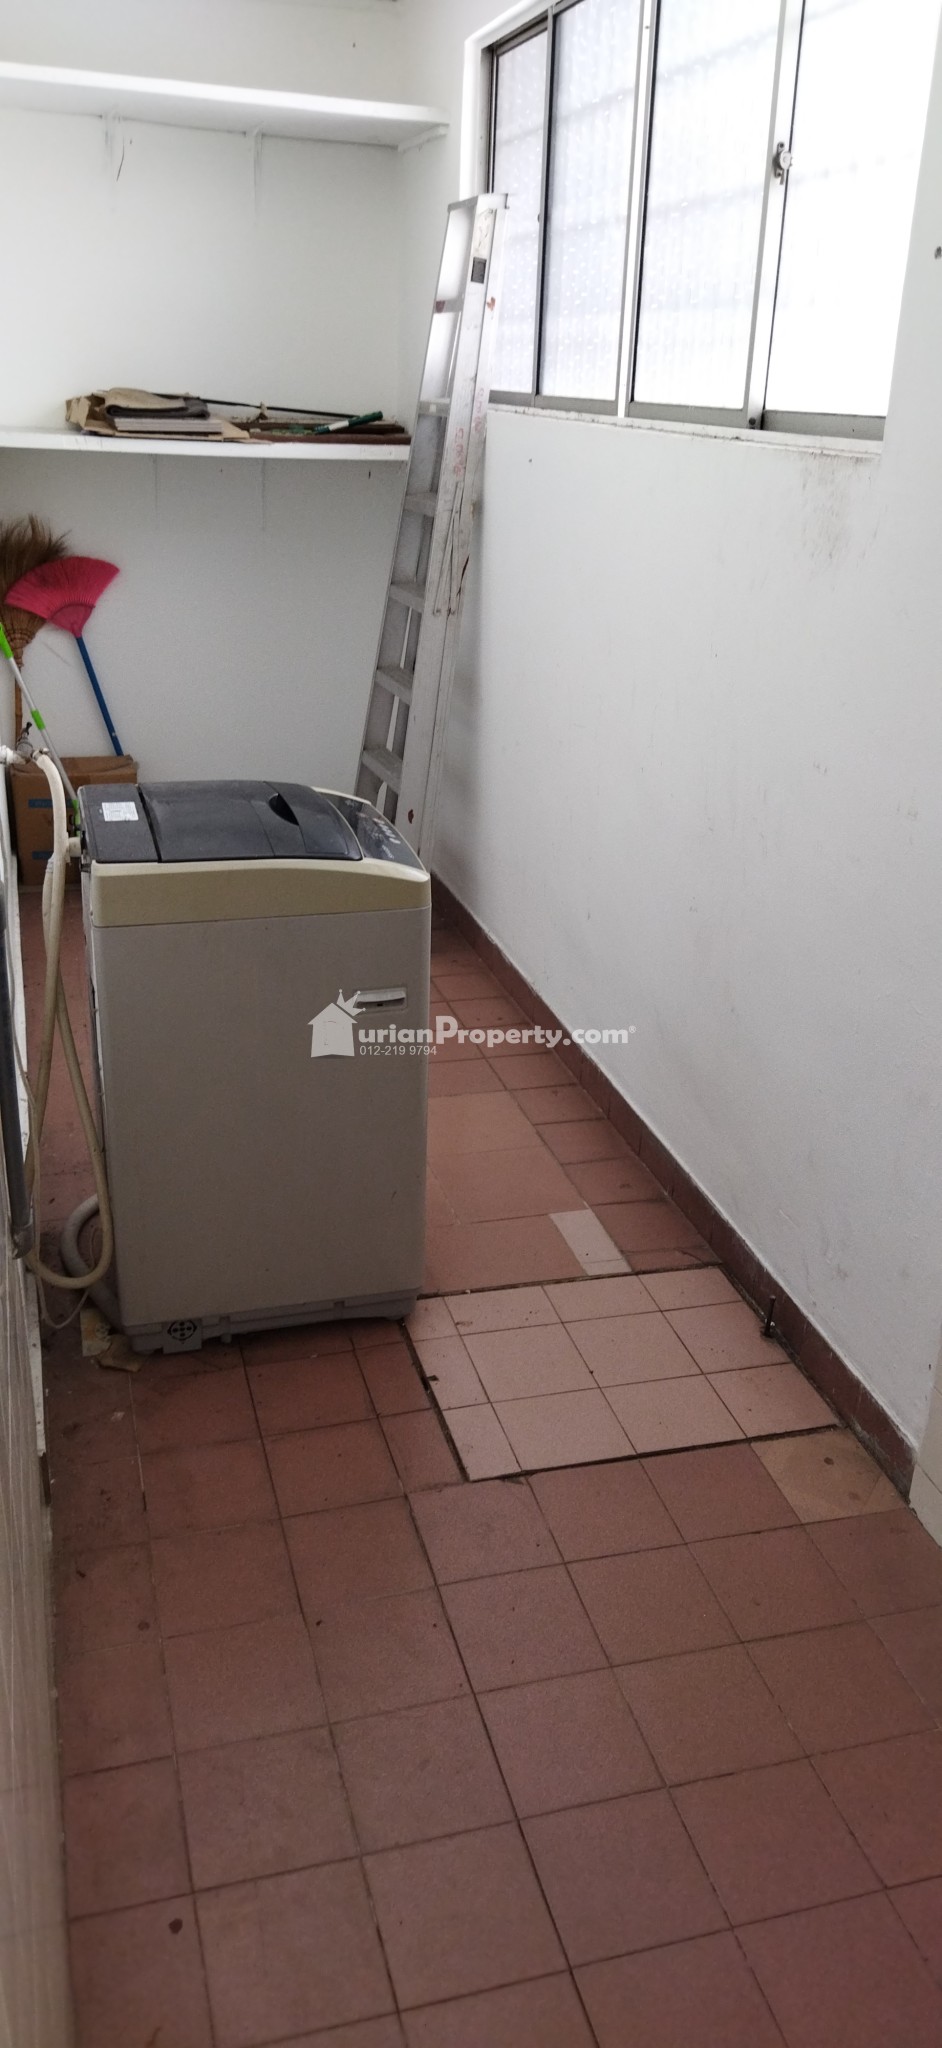 Terrace House For Rent at PJS 9